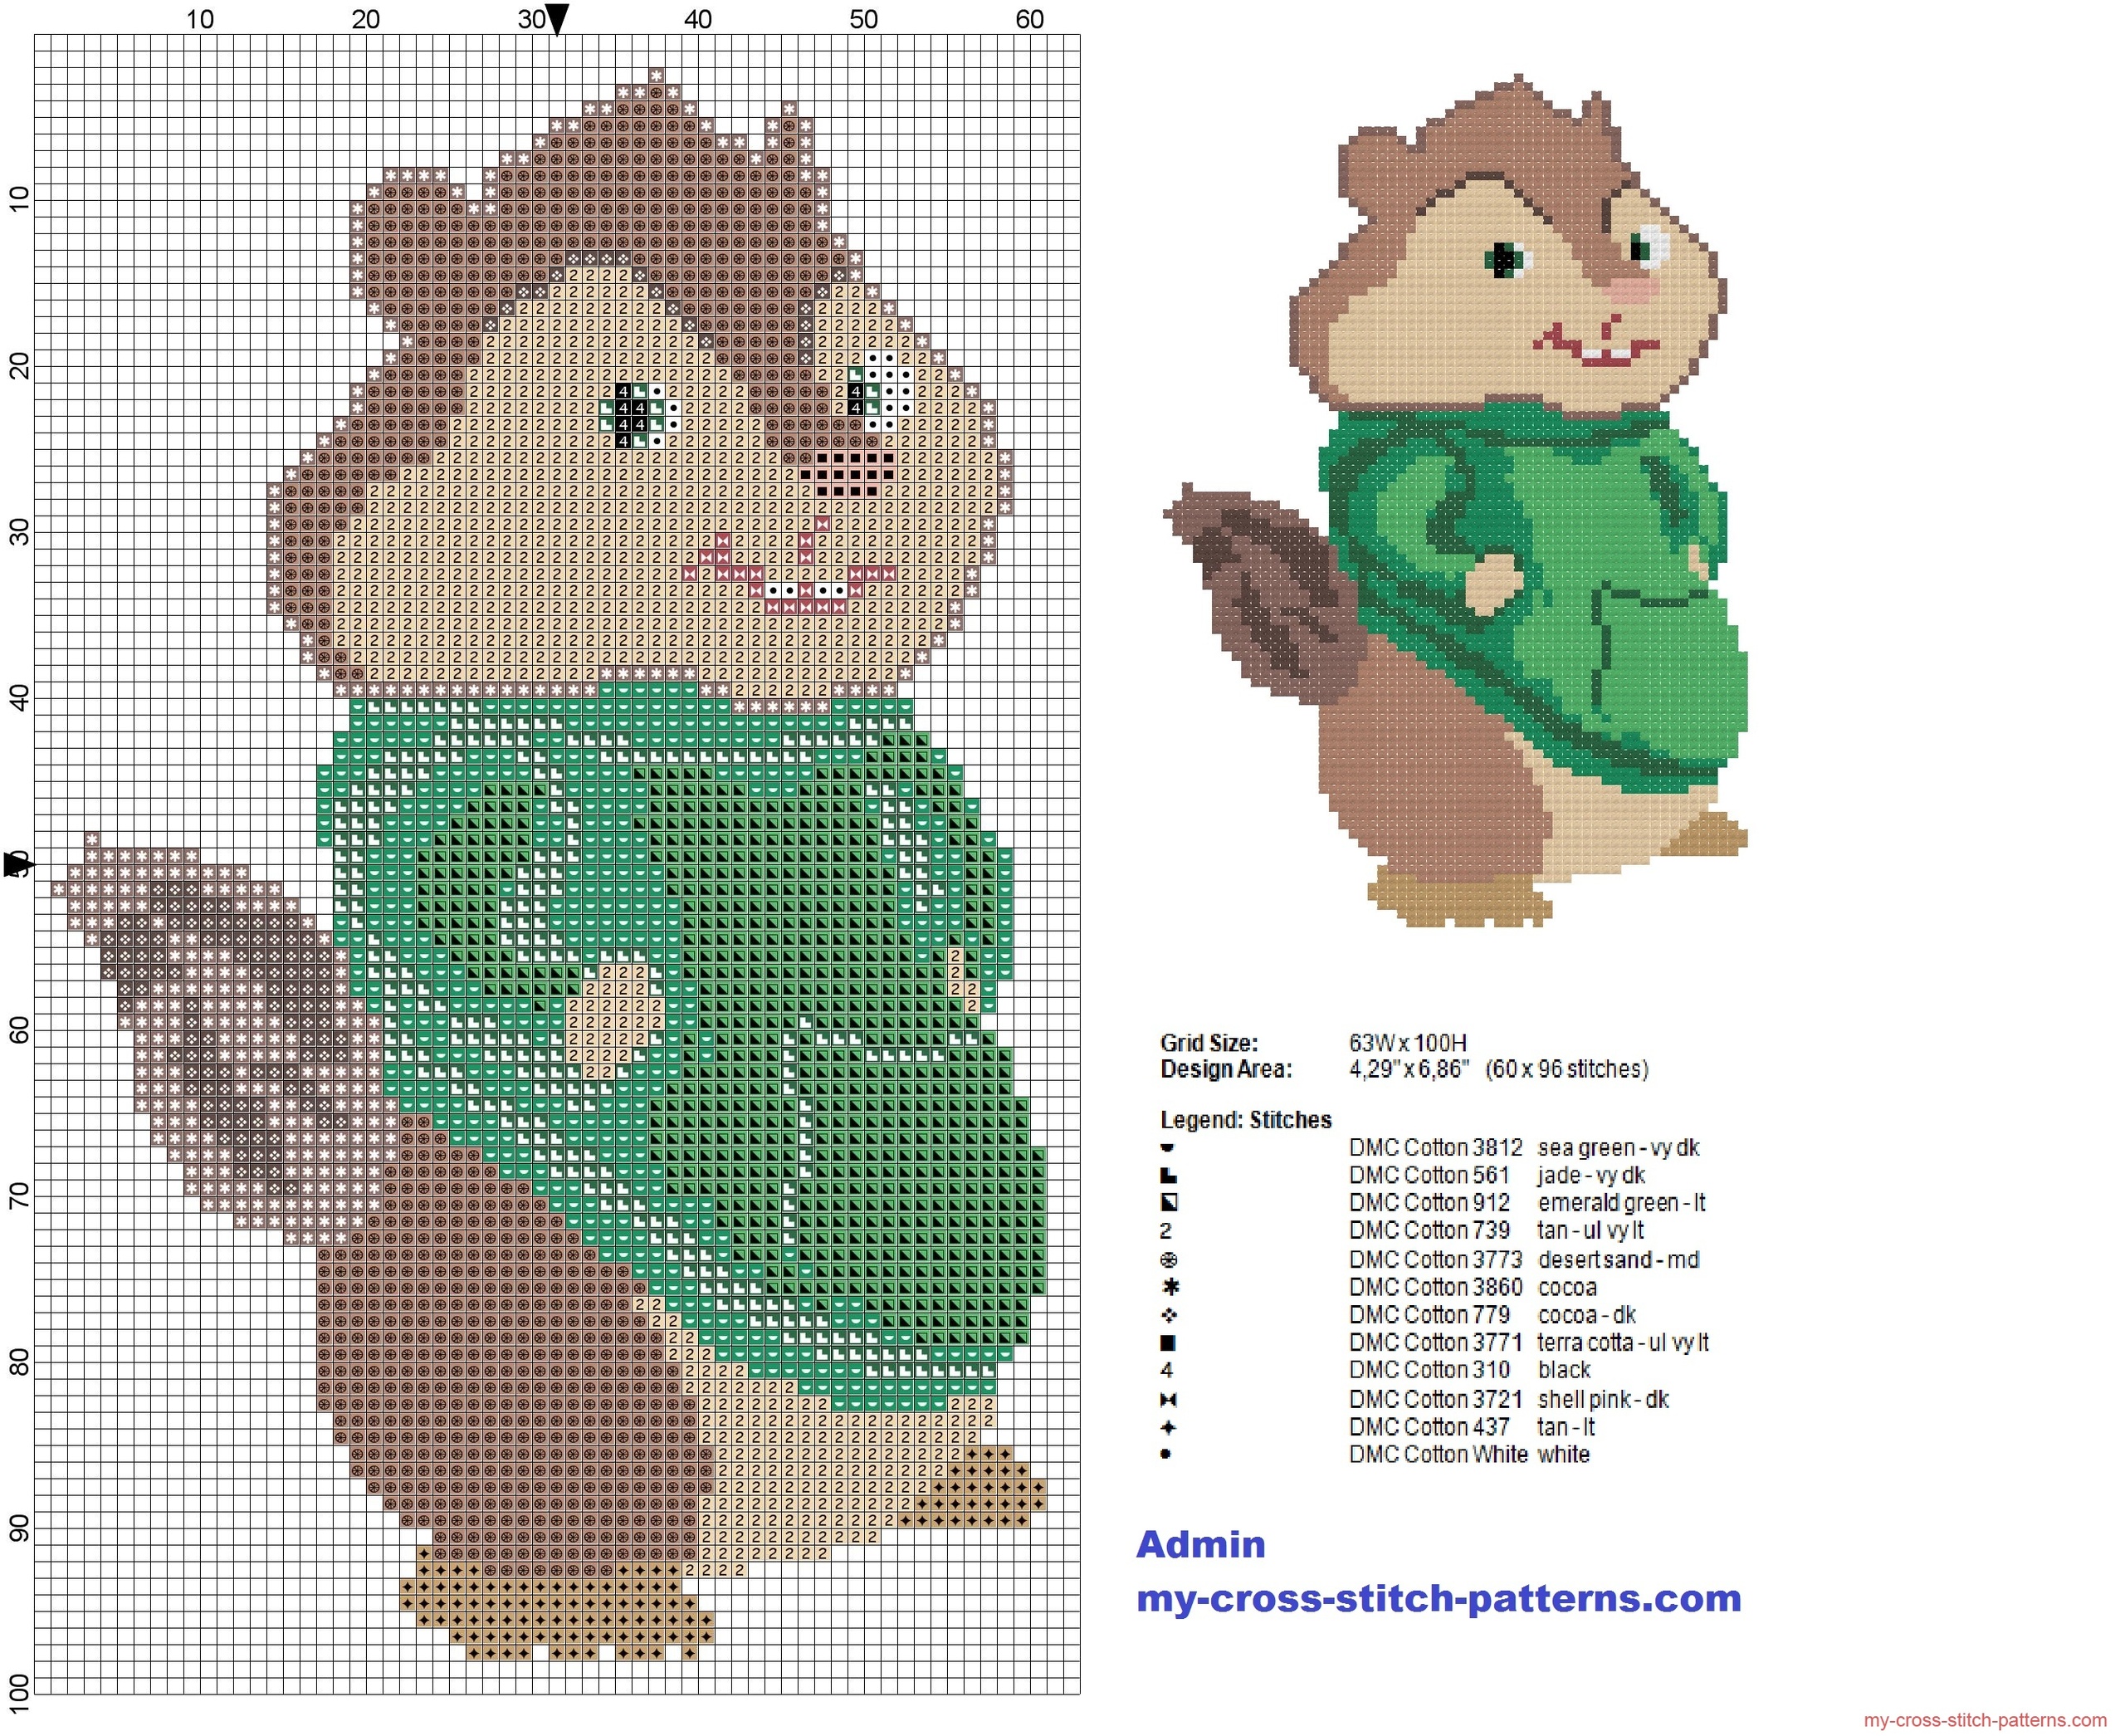 theodore_alvin_and_the_chipmunks_character_cross_stitch_pattern